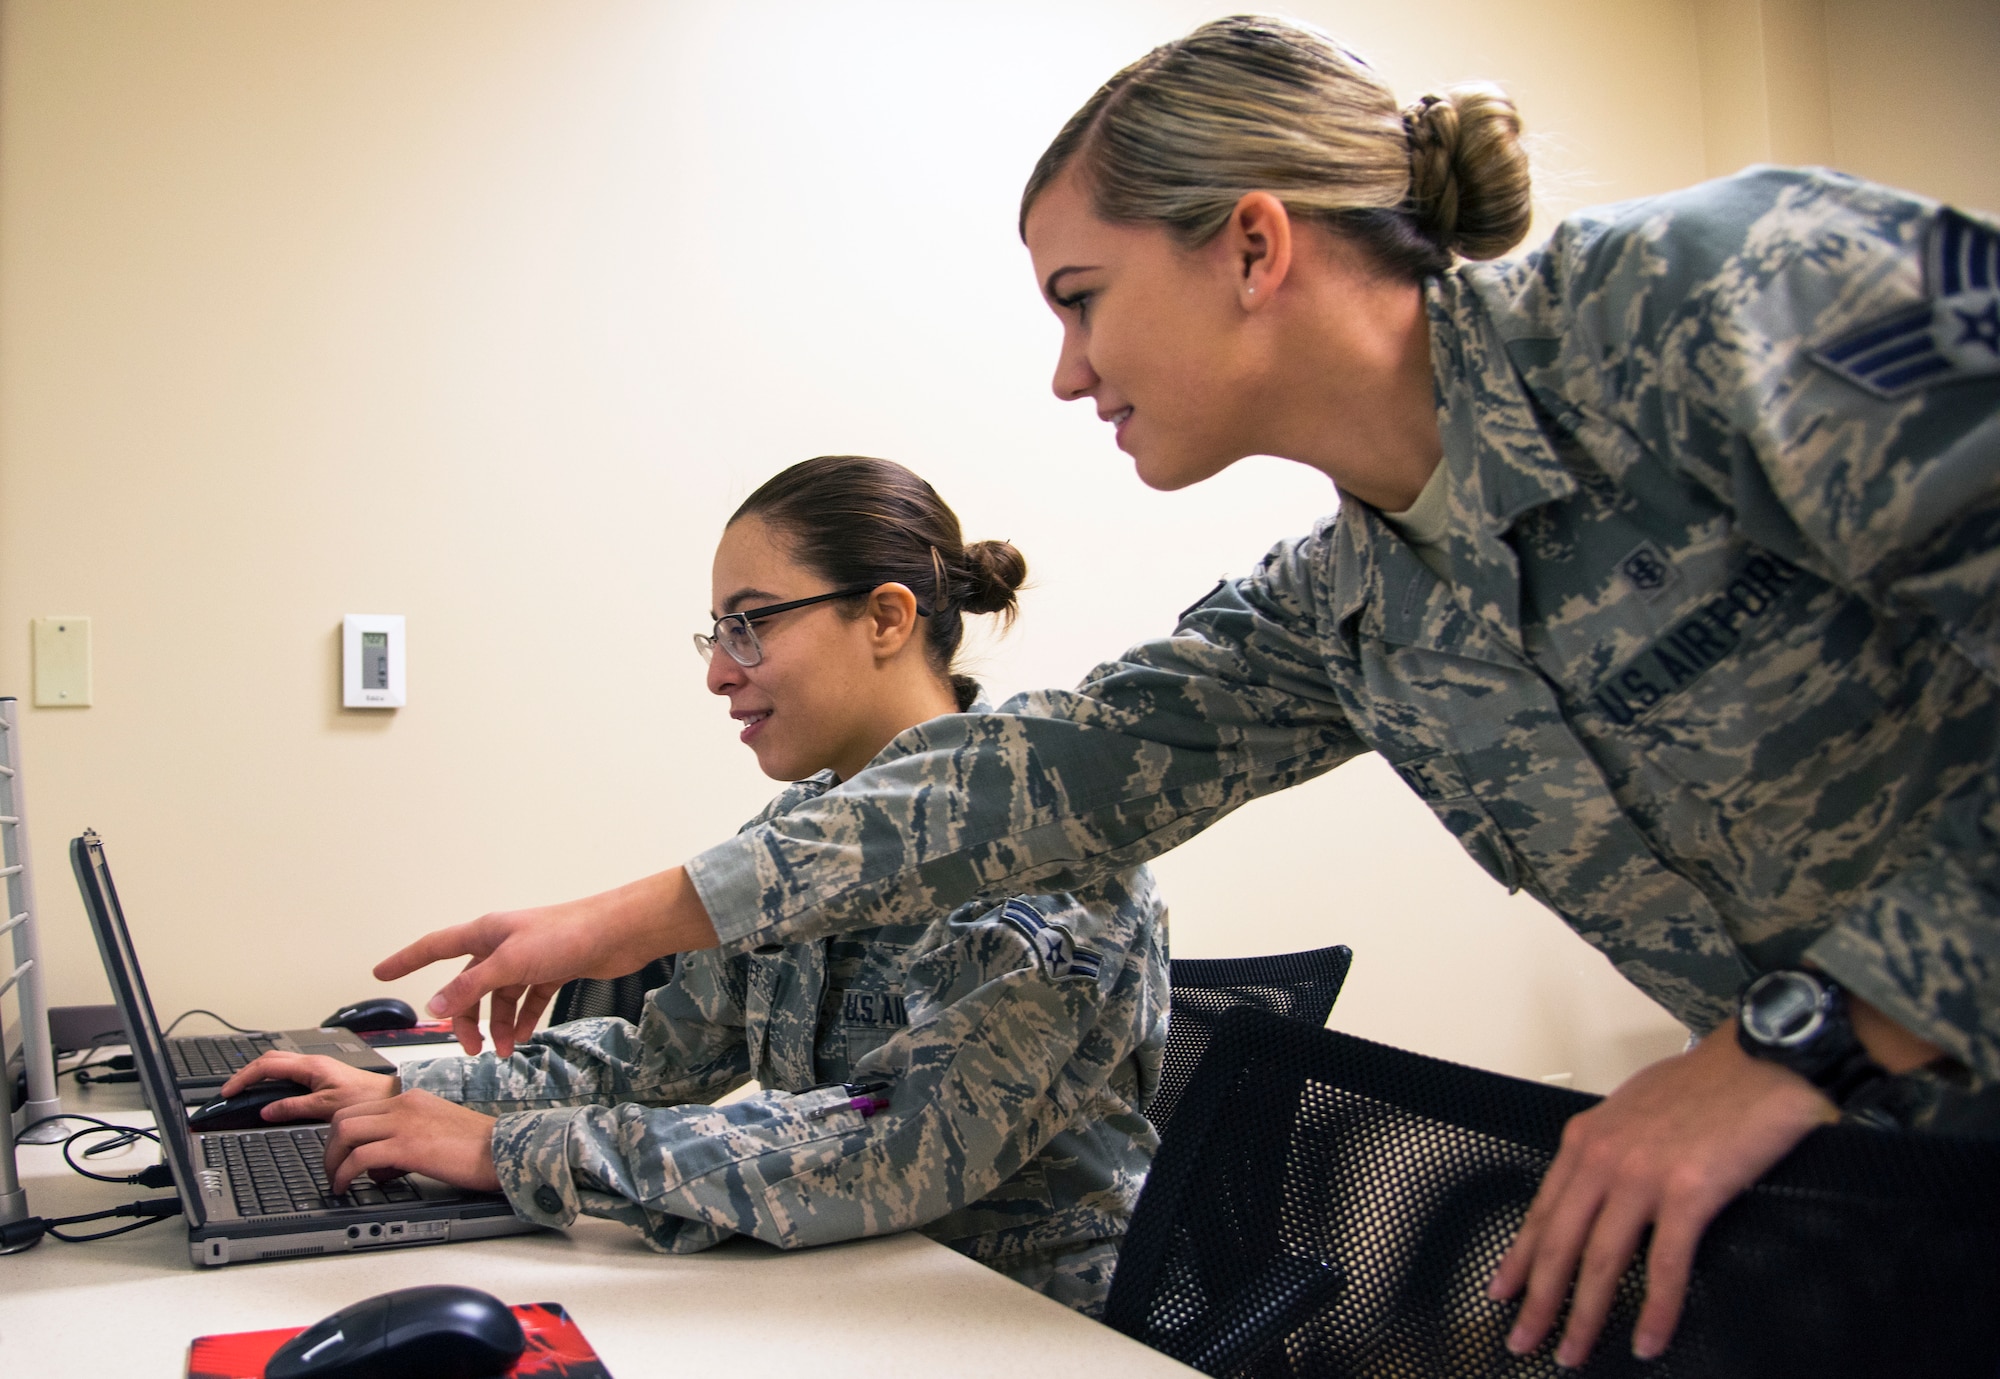 U.S. Air Force Senior Airman Amber Durrence, right, a 6th Medical Operations Squadron mental health technician, shows another Airman how to complete the mental health examination of their pre-deployment process at MacDill Air Force Base, Fla., Nov. 29, 2018.